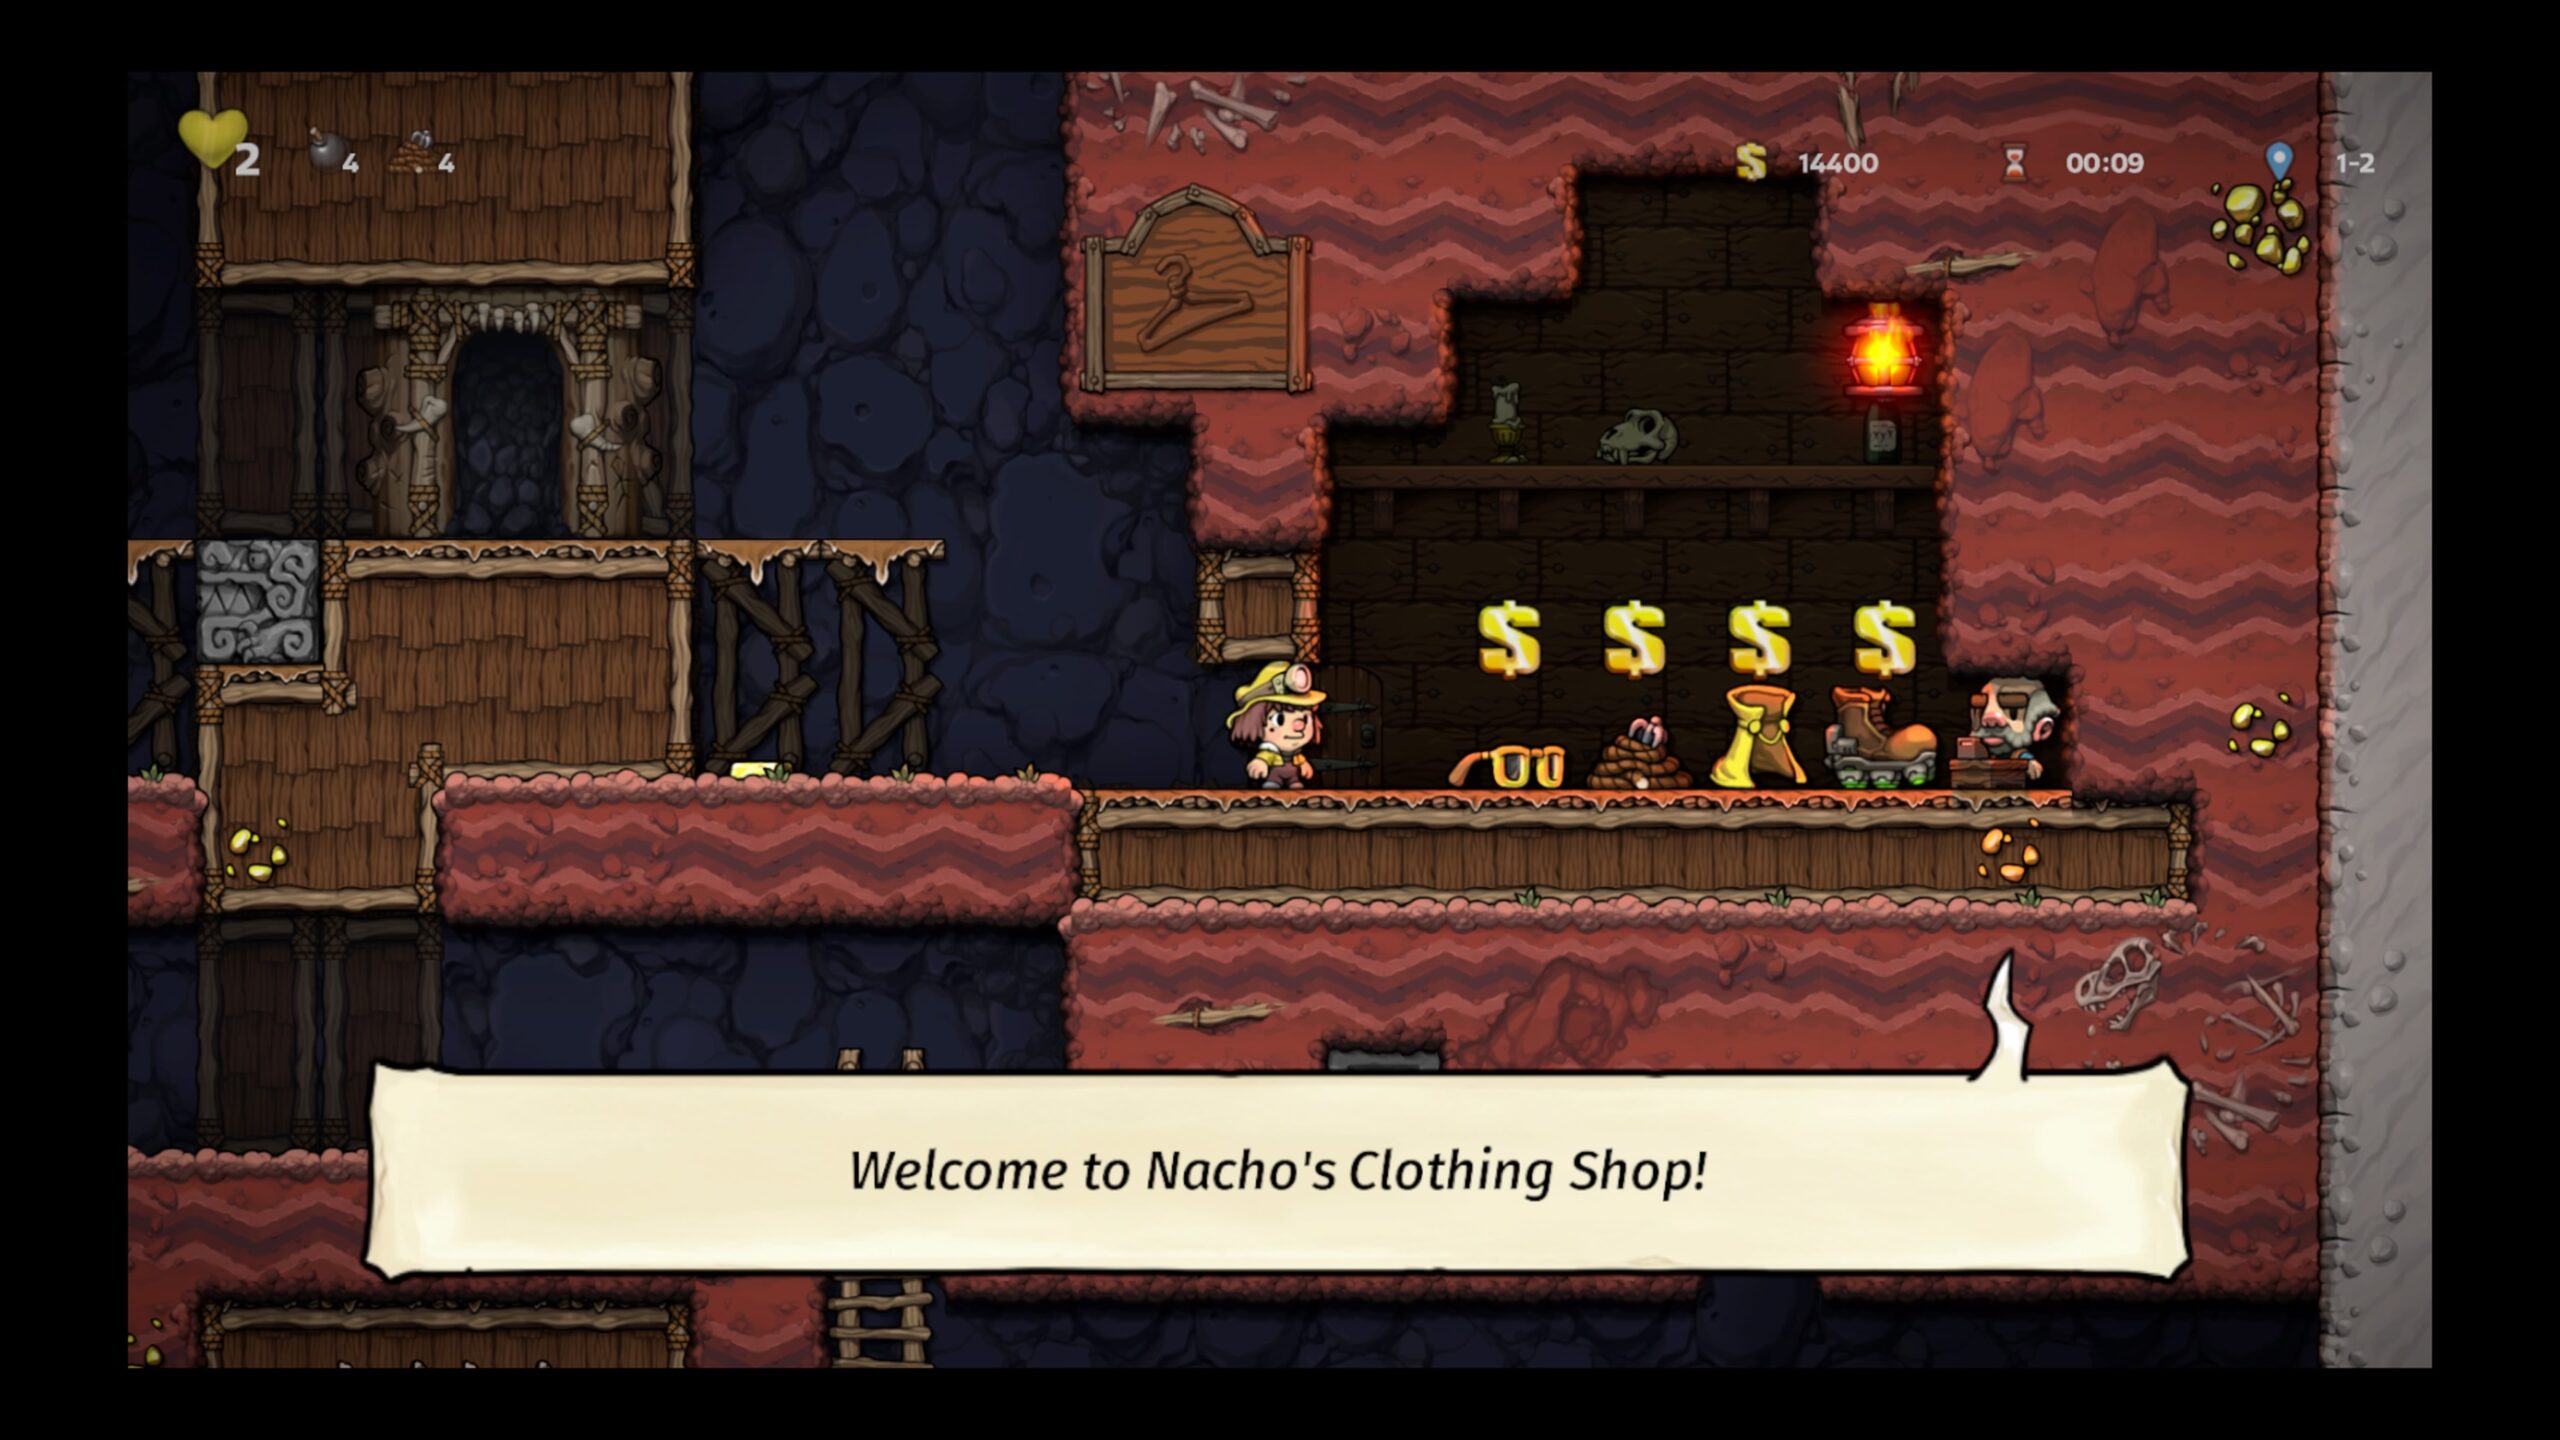 Spelunky 2 Use This Incredibly Easy Method To Take Out The Shopkeeper And Steal All His Stuff